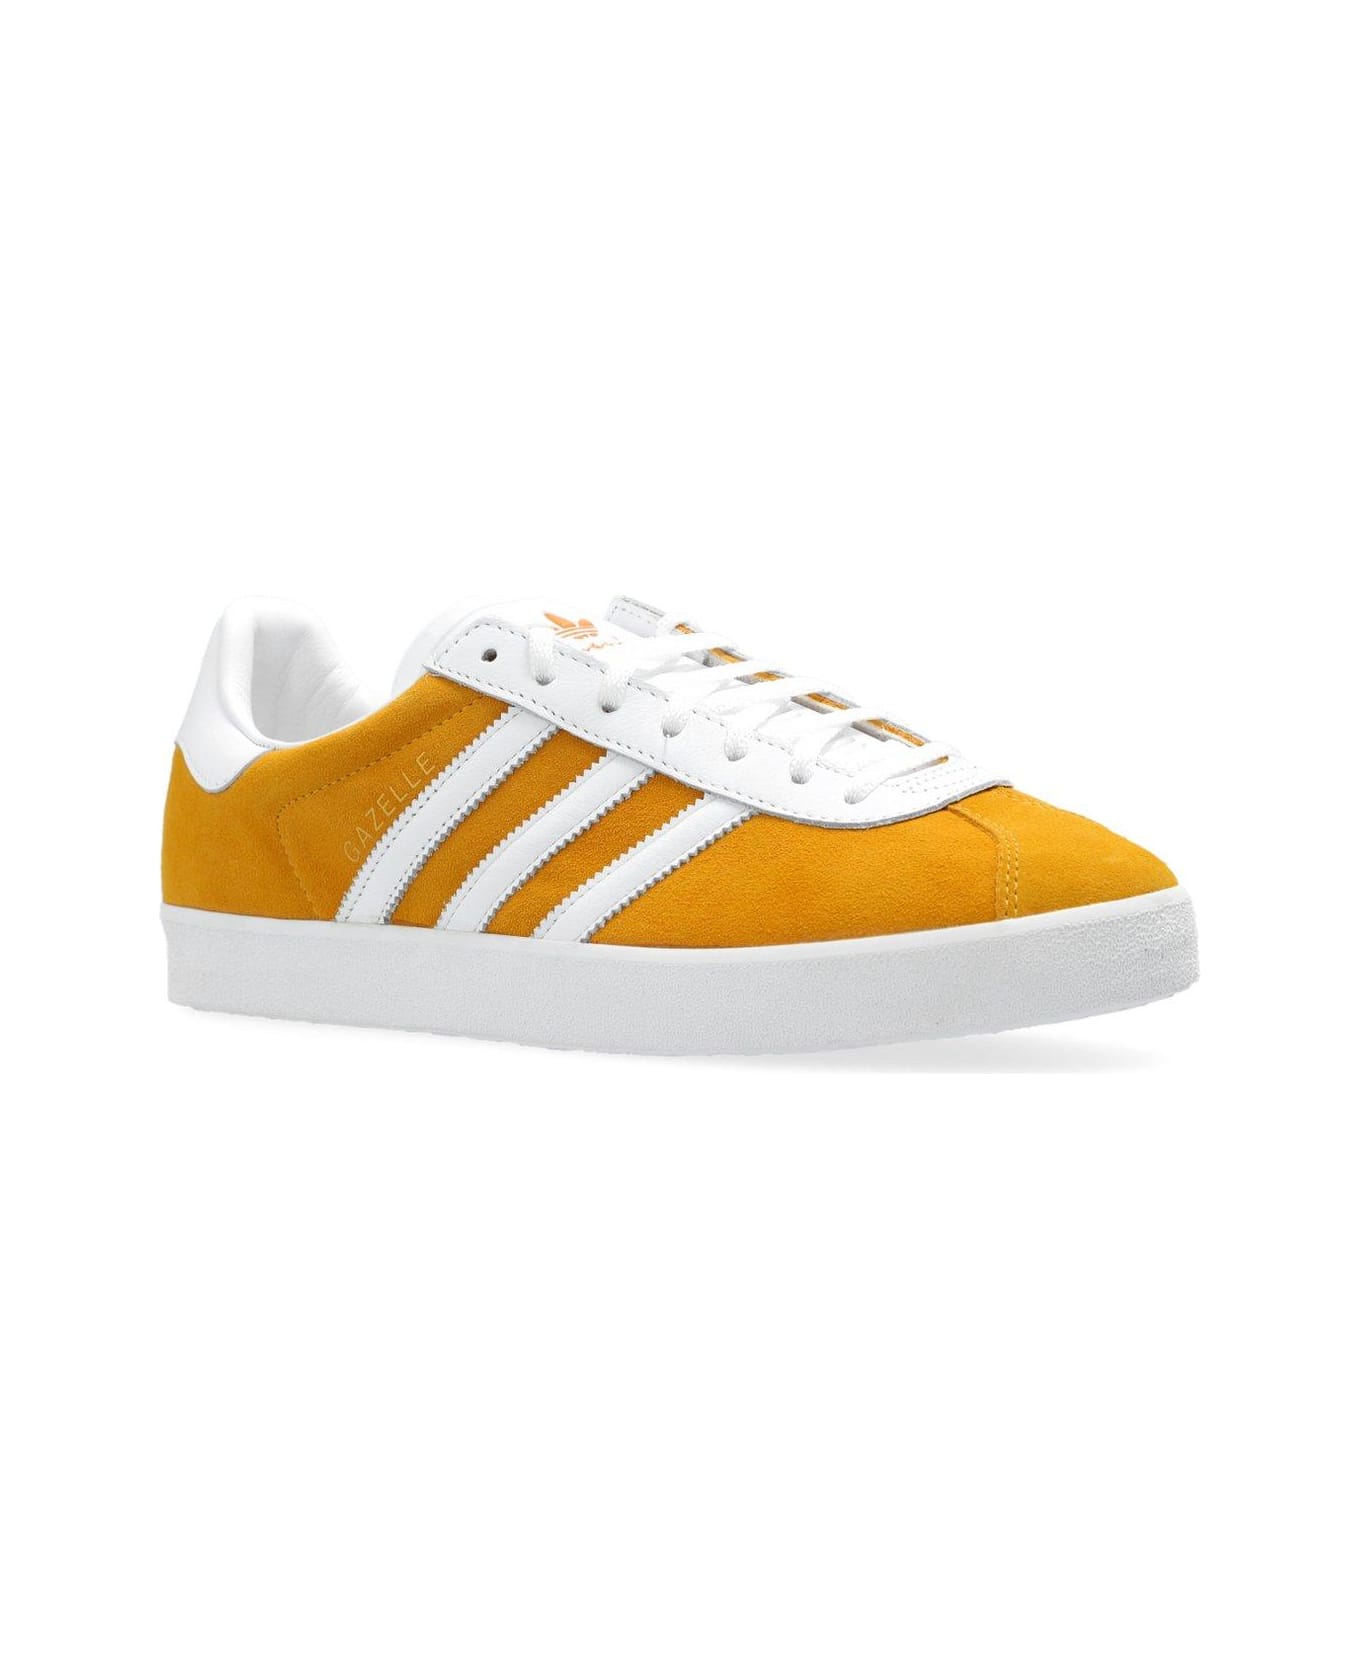 Adidas Gazelle 85 Lace-up Sneakers - Yellow